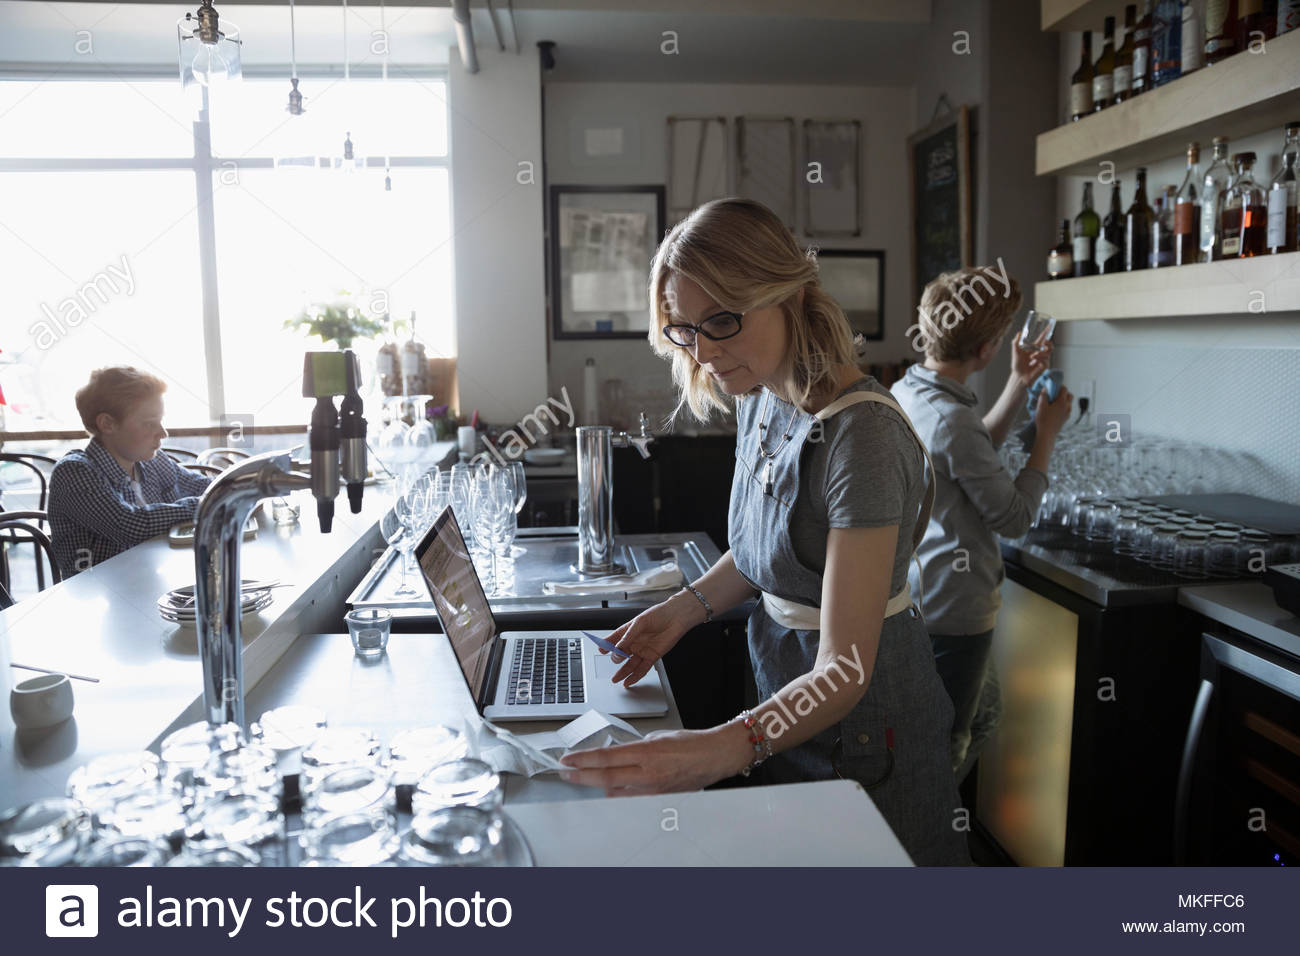 Family business owner working at laptop in cafe Stock Photo